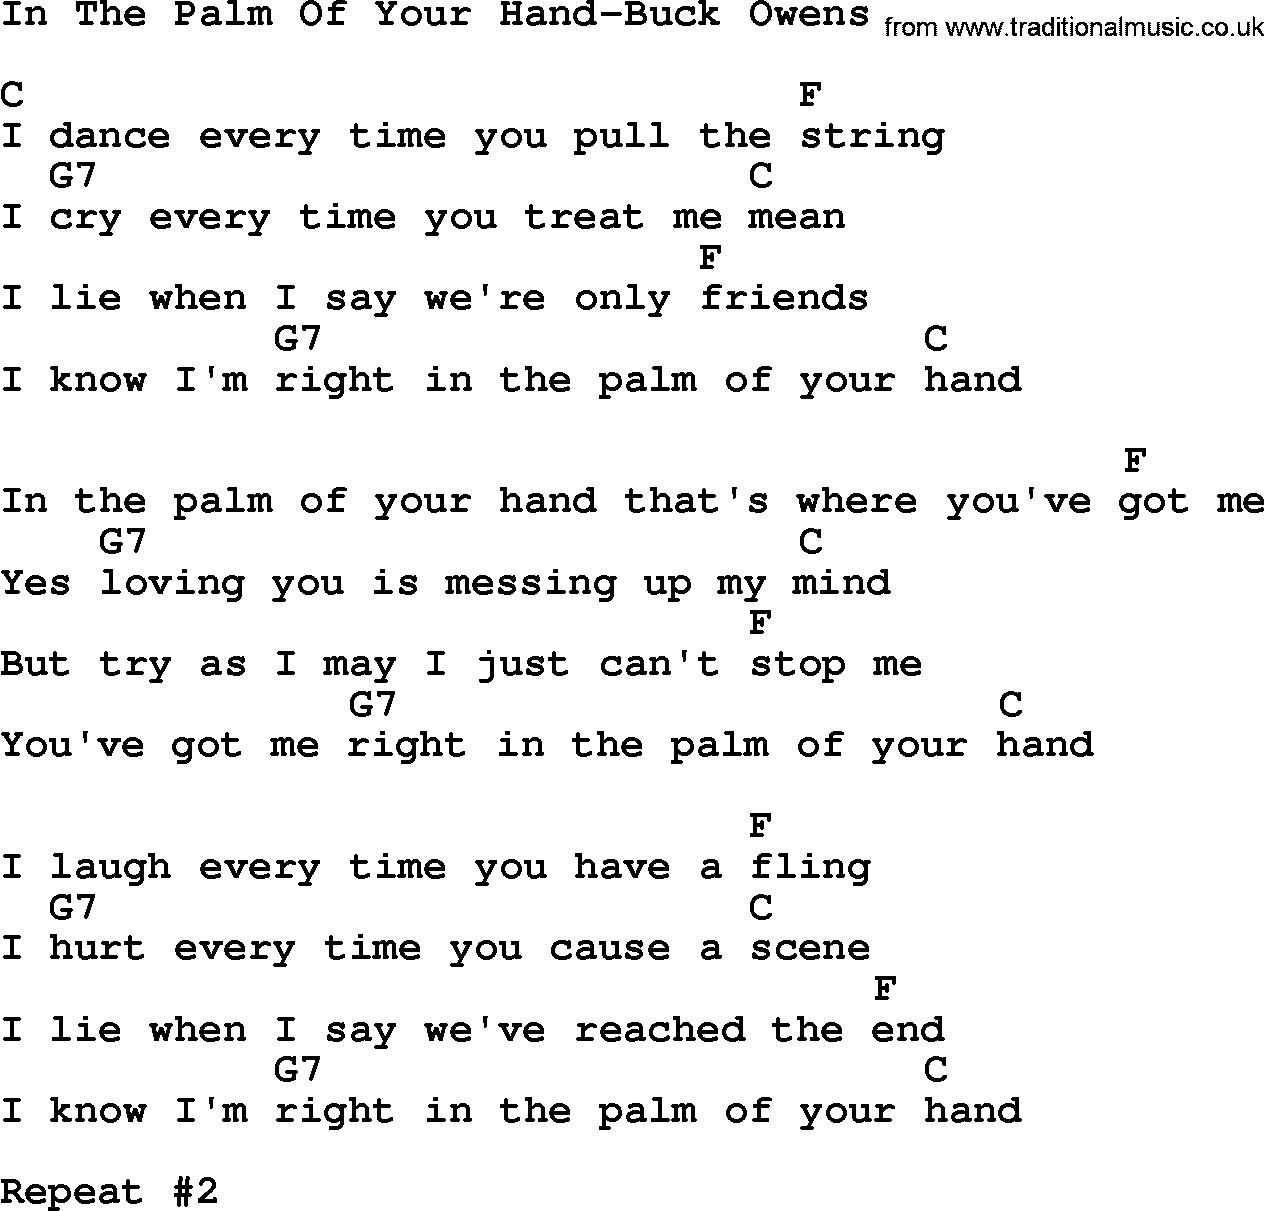 Country music song: In The Palm Of Your Hand-Buck Owens lyrics and chords